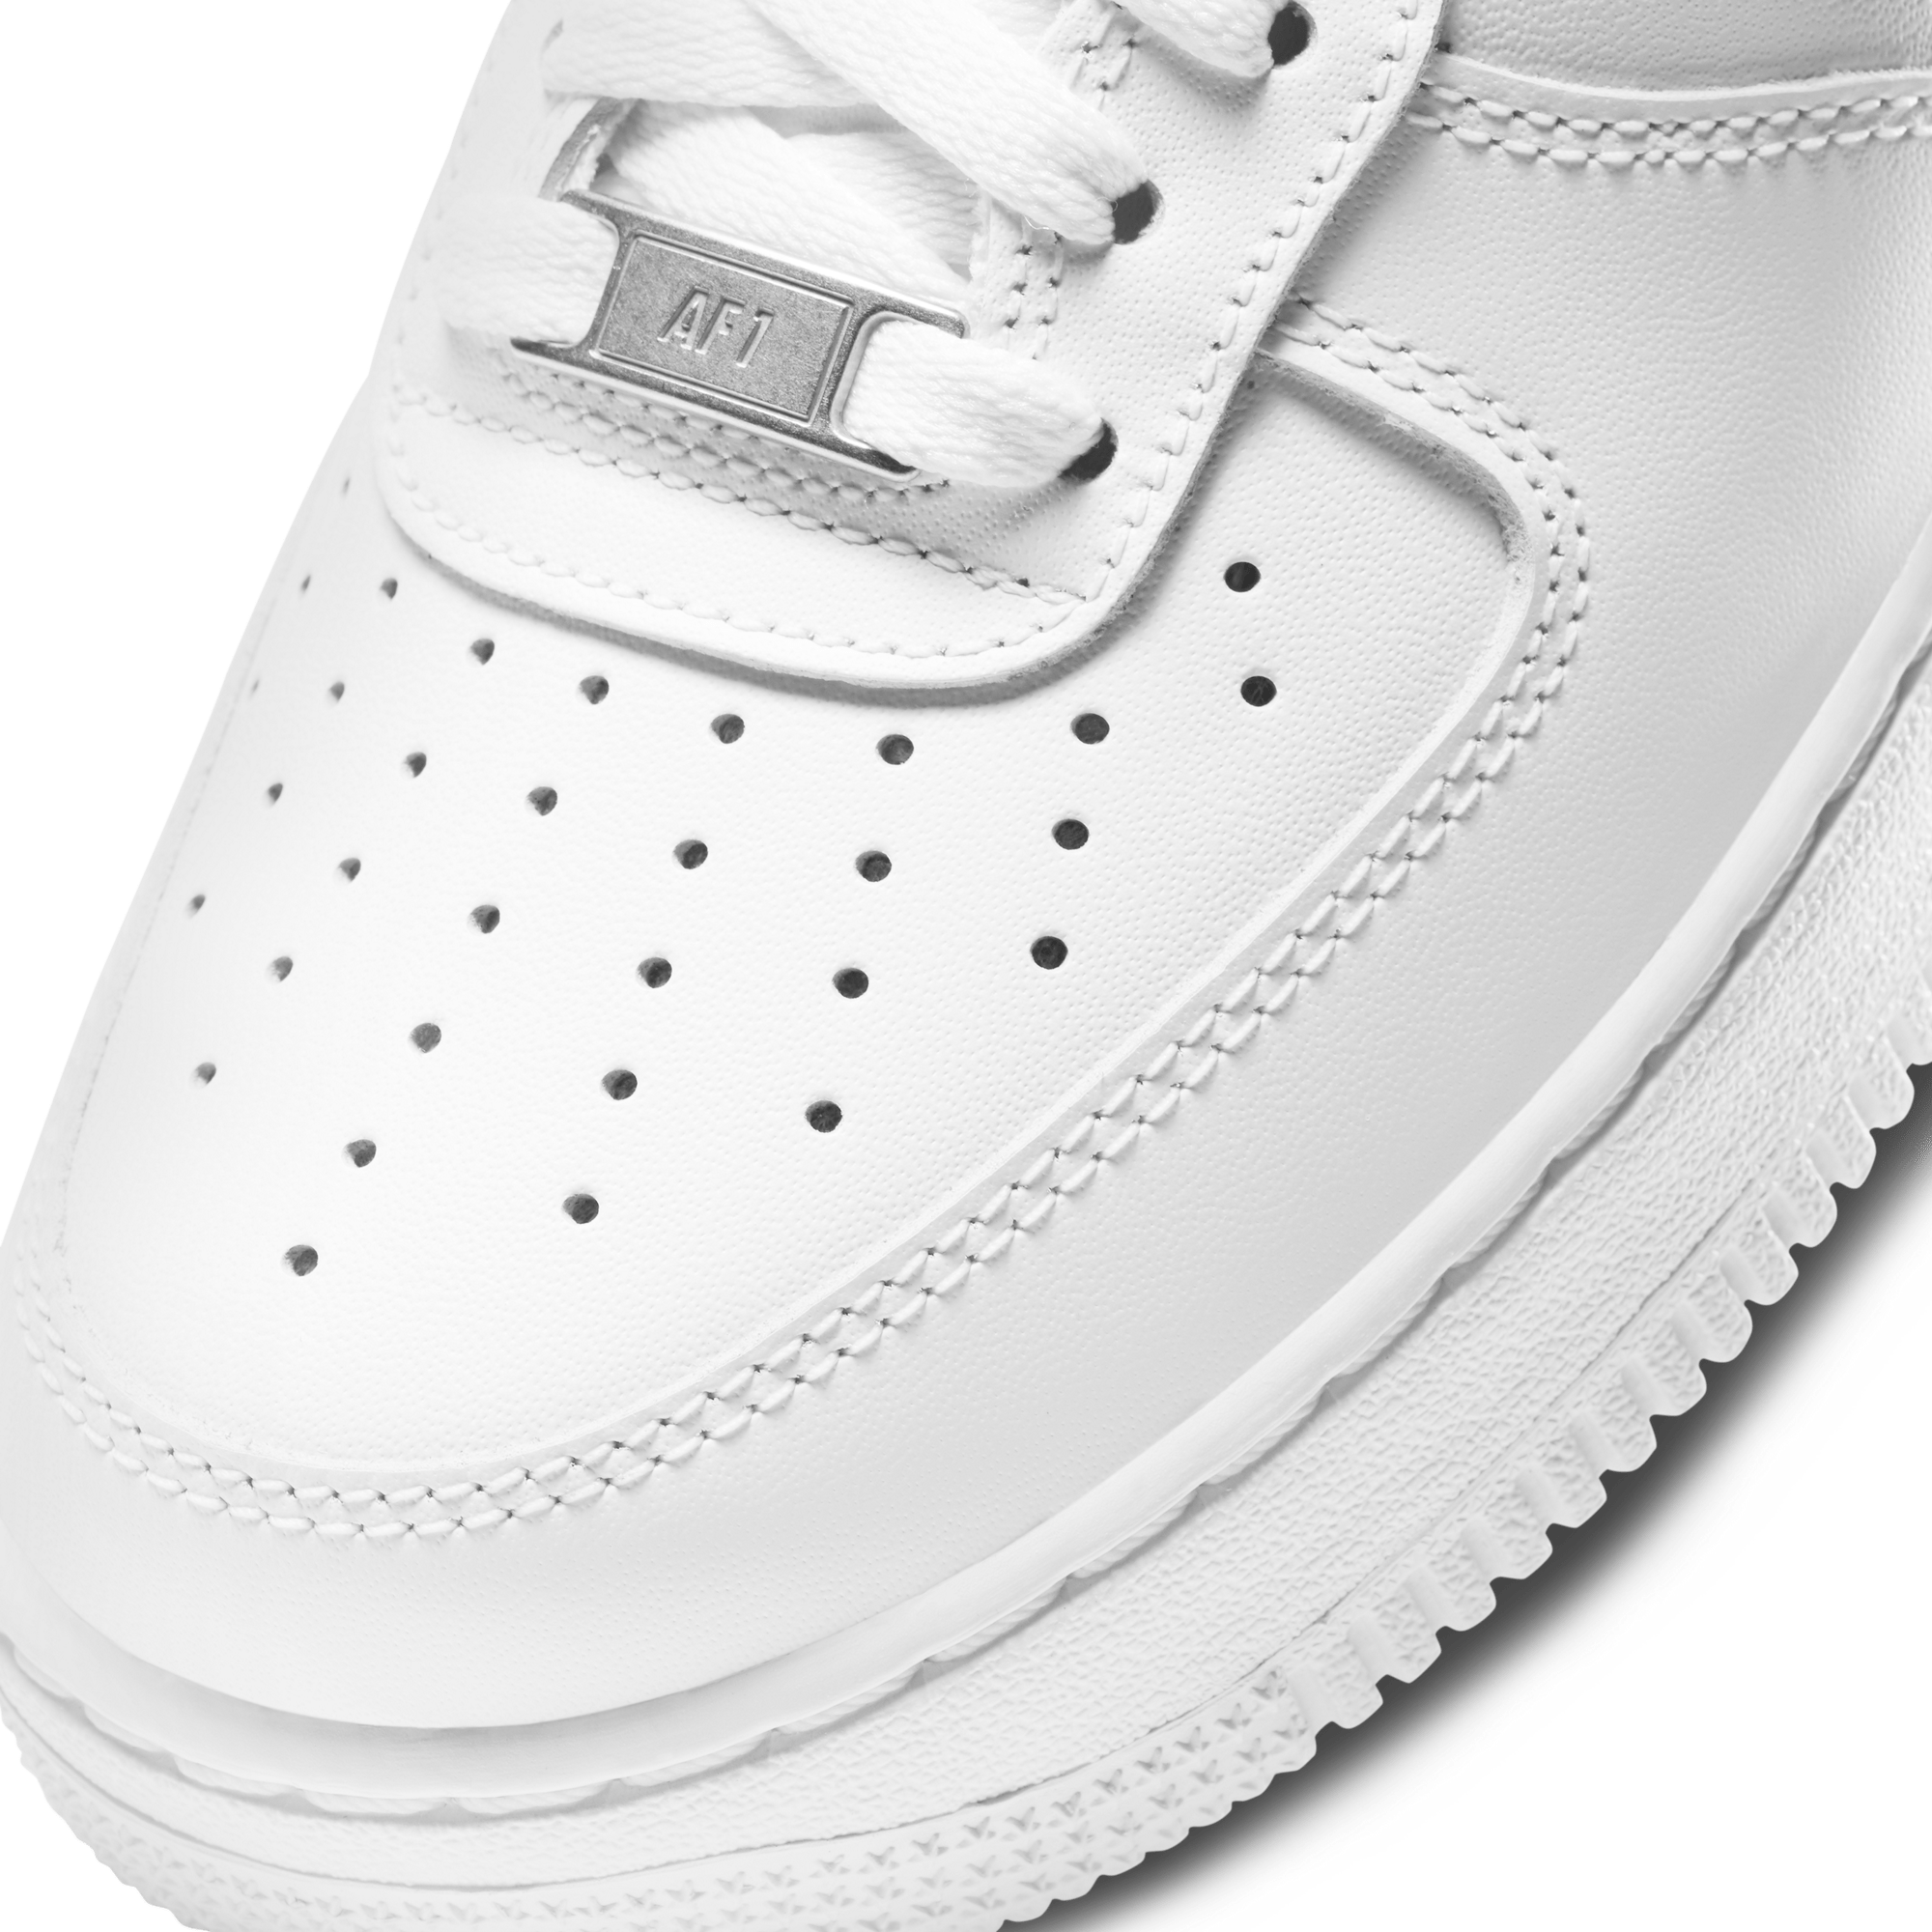 Nike Women's Air Force 1 Shoes, White/Washed Teal/White, 7